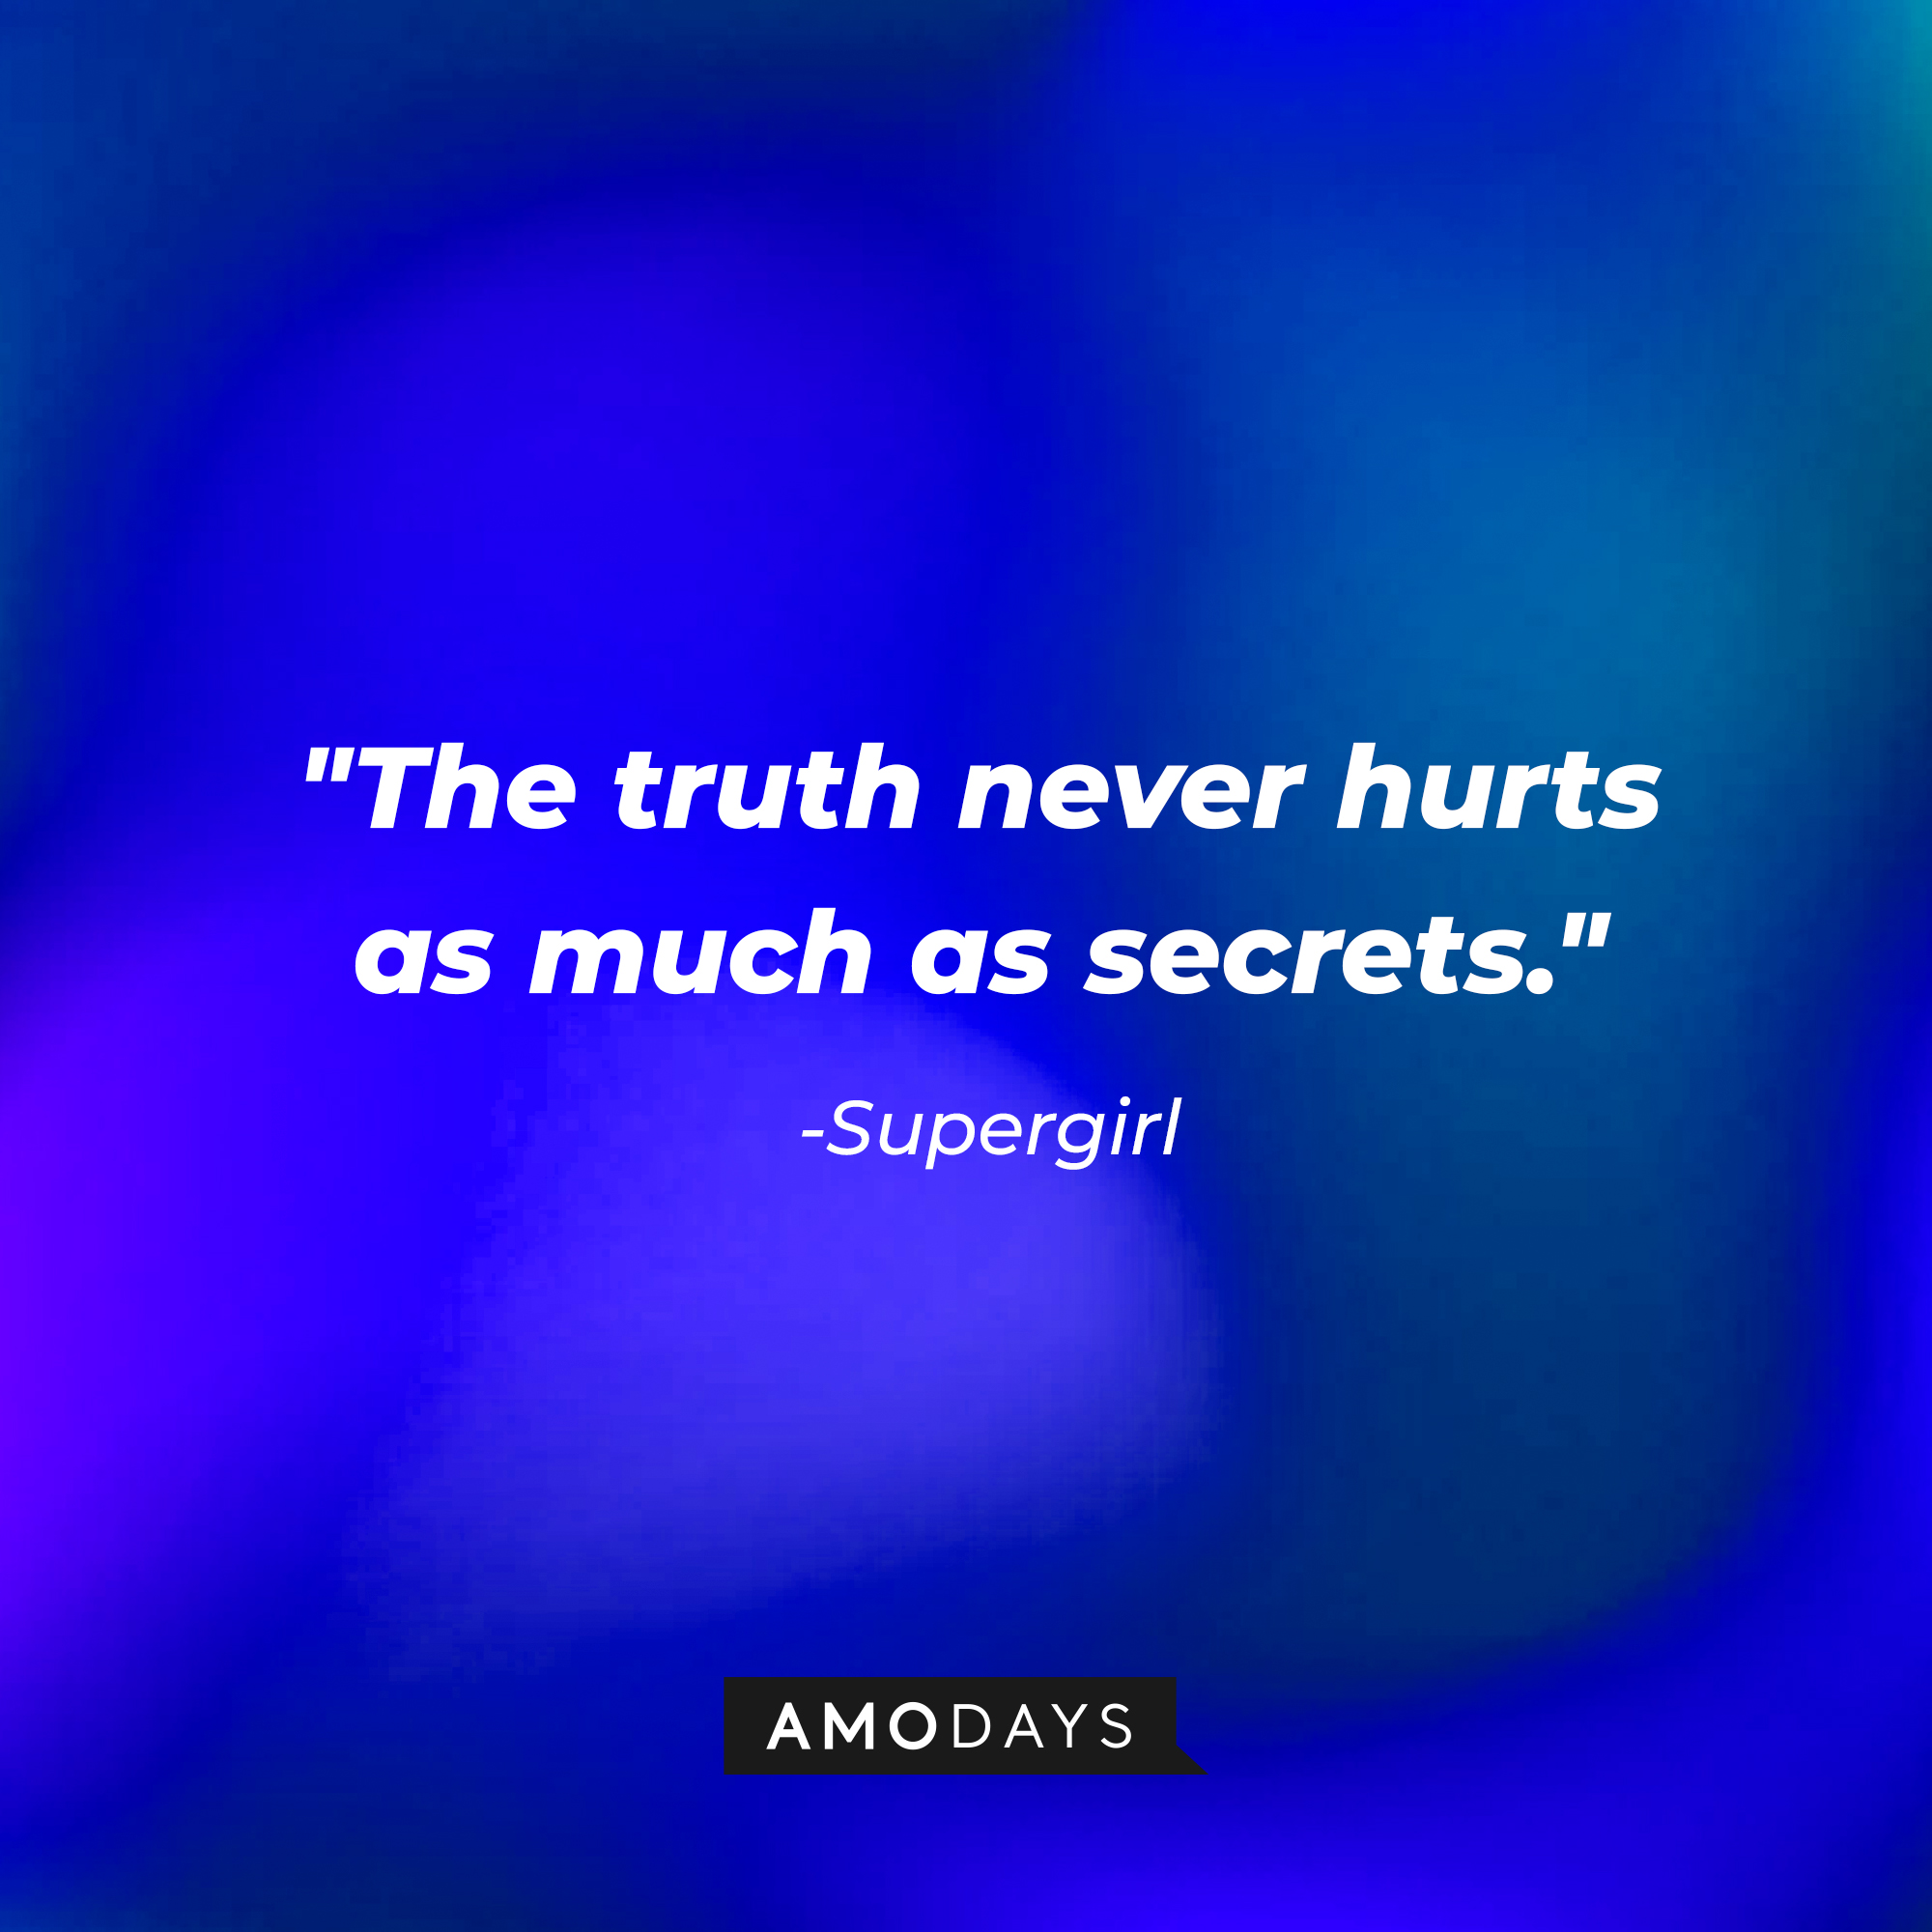 Supergirl's quote: "The truth never hurts as much as secrets." | Source: AmoDays